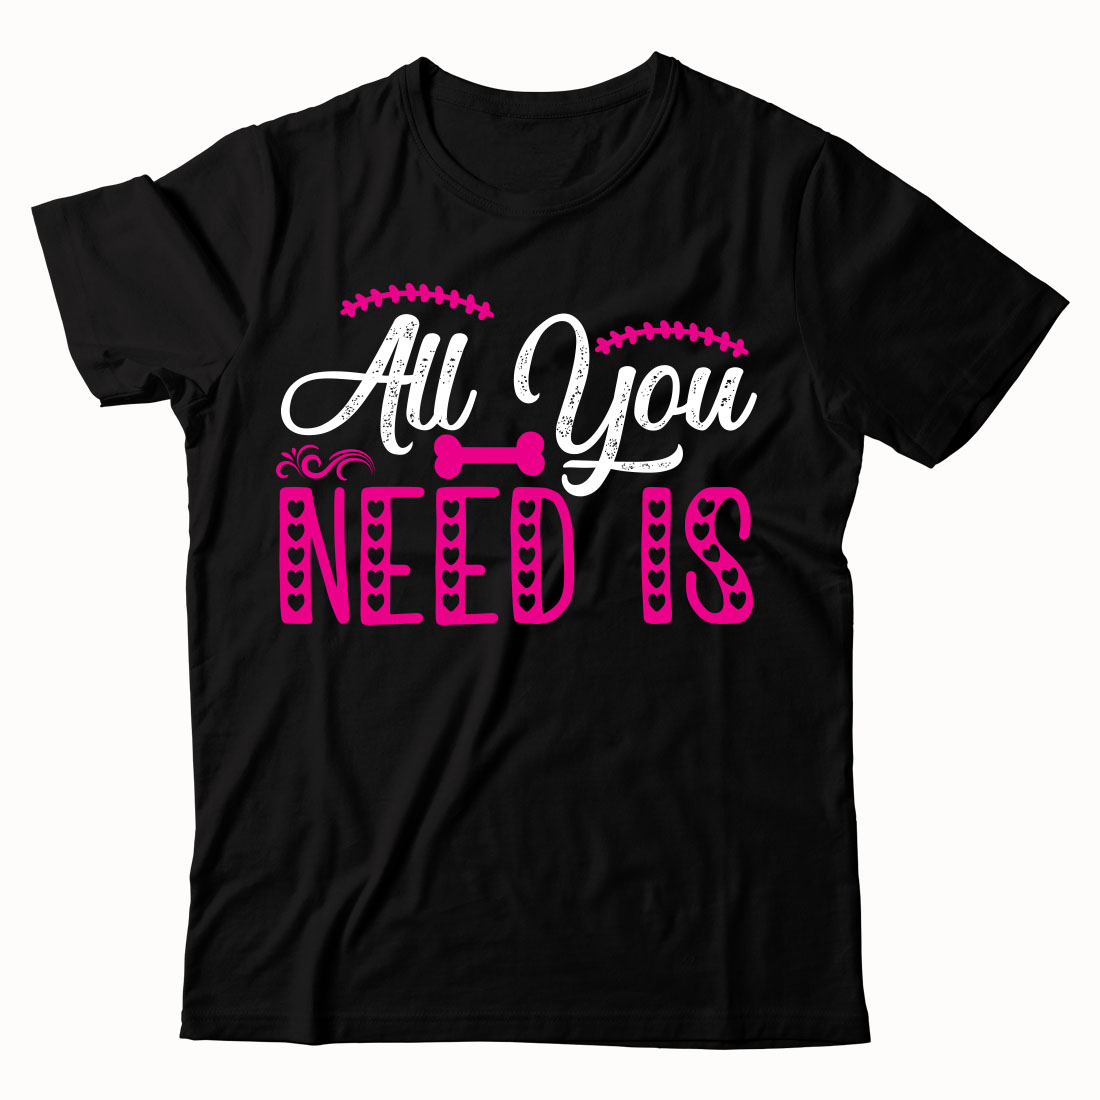 Black t - shirt with pink lettering that says all you need is.